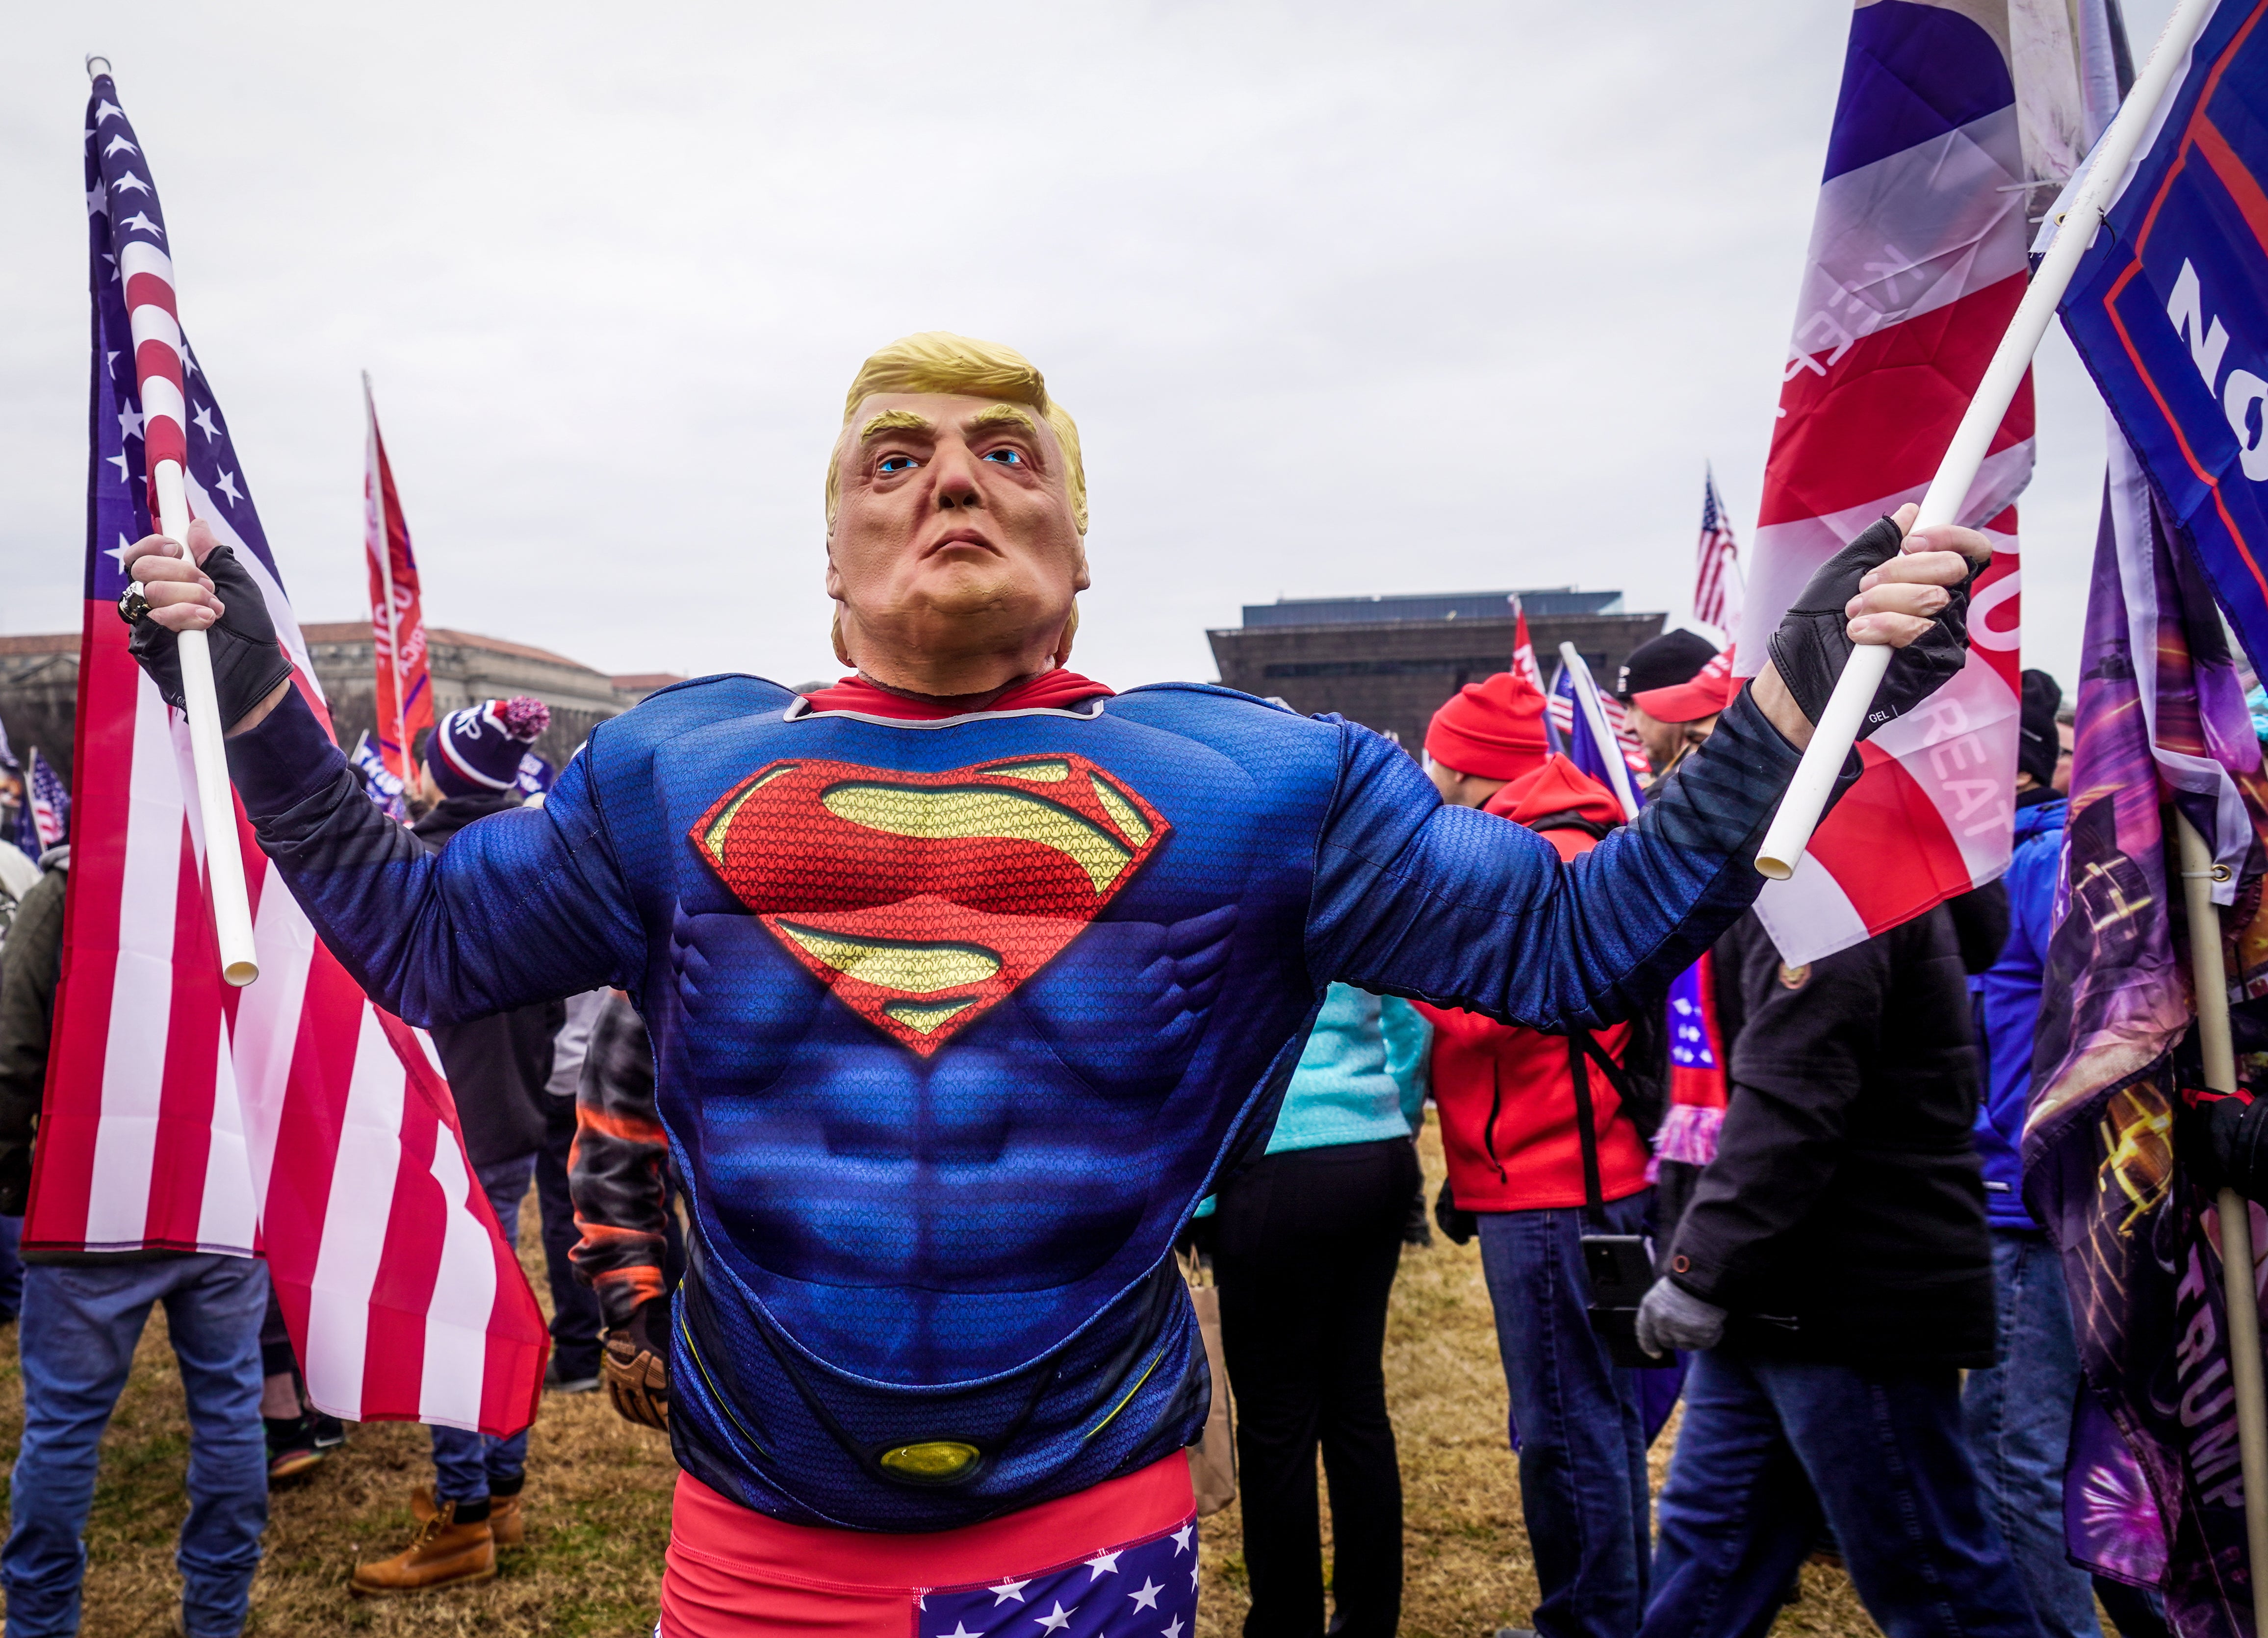 A Trump supporter dressed in a Superman costume holding an American flag at a Stop the Steal rally